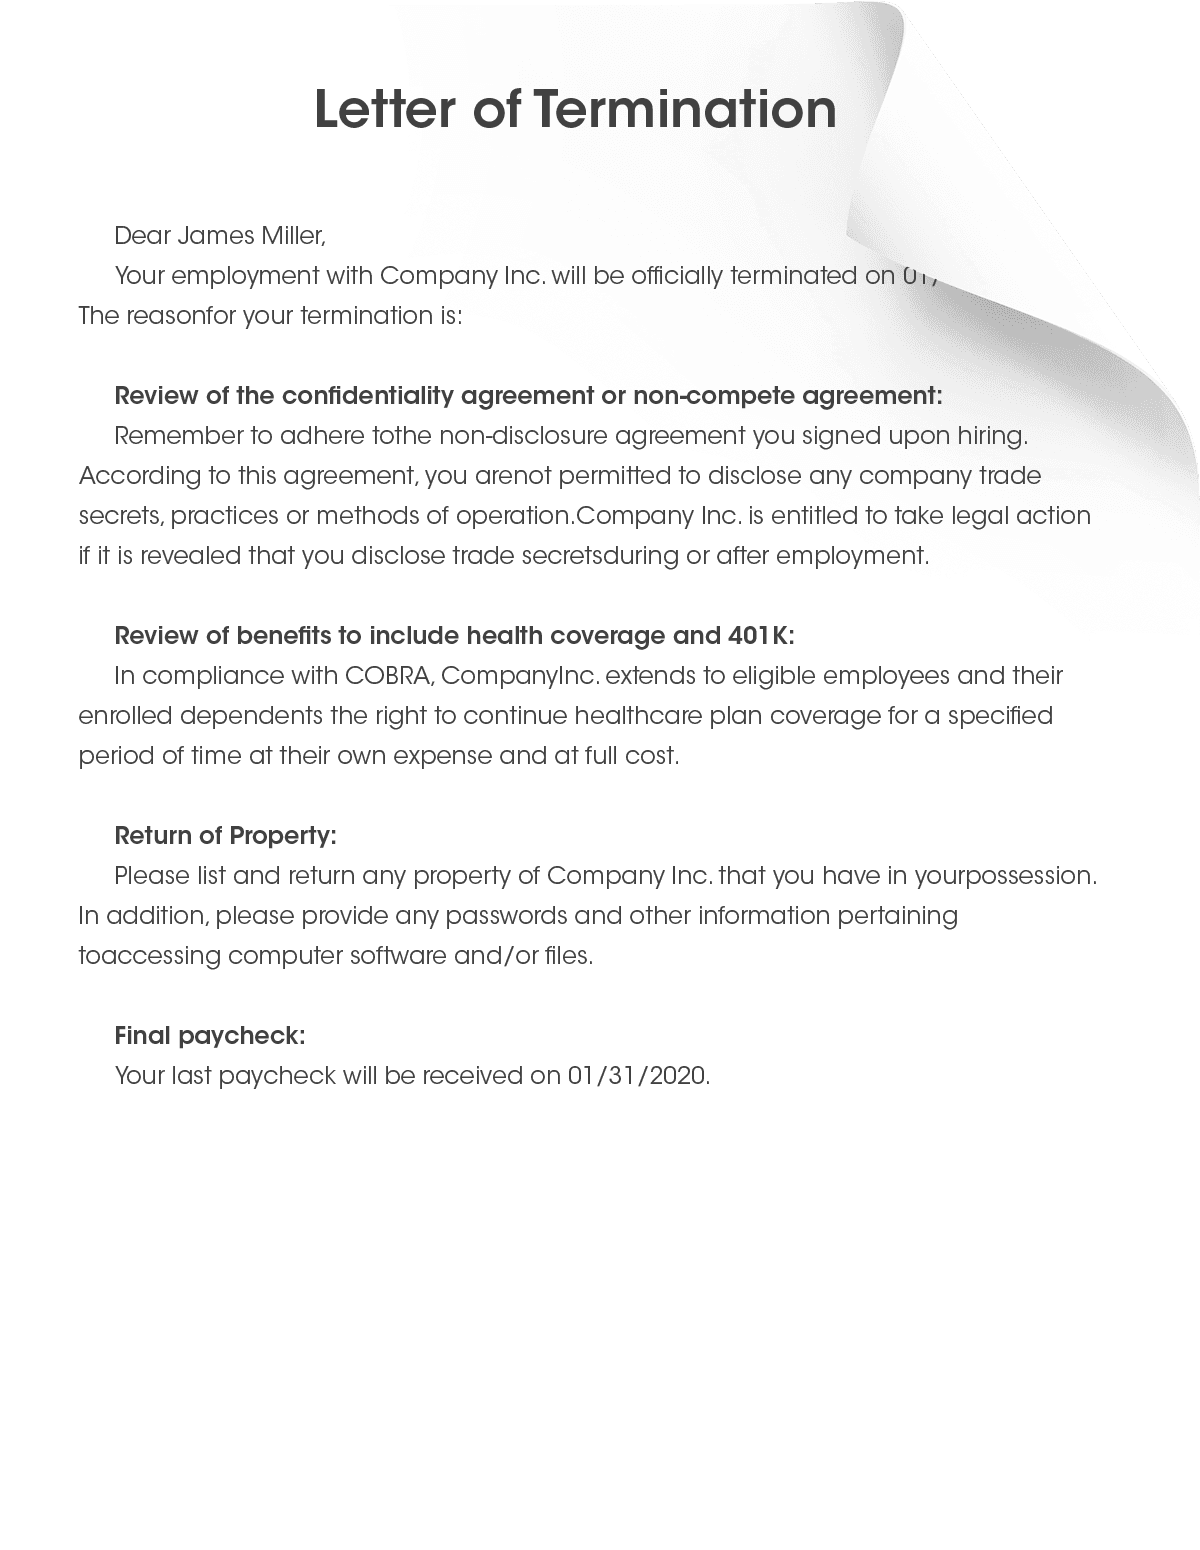 Company Termination Letter from s30311.pcdn.co